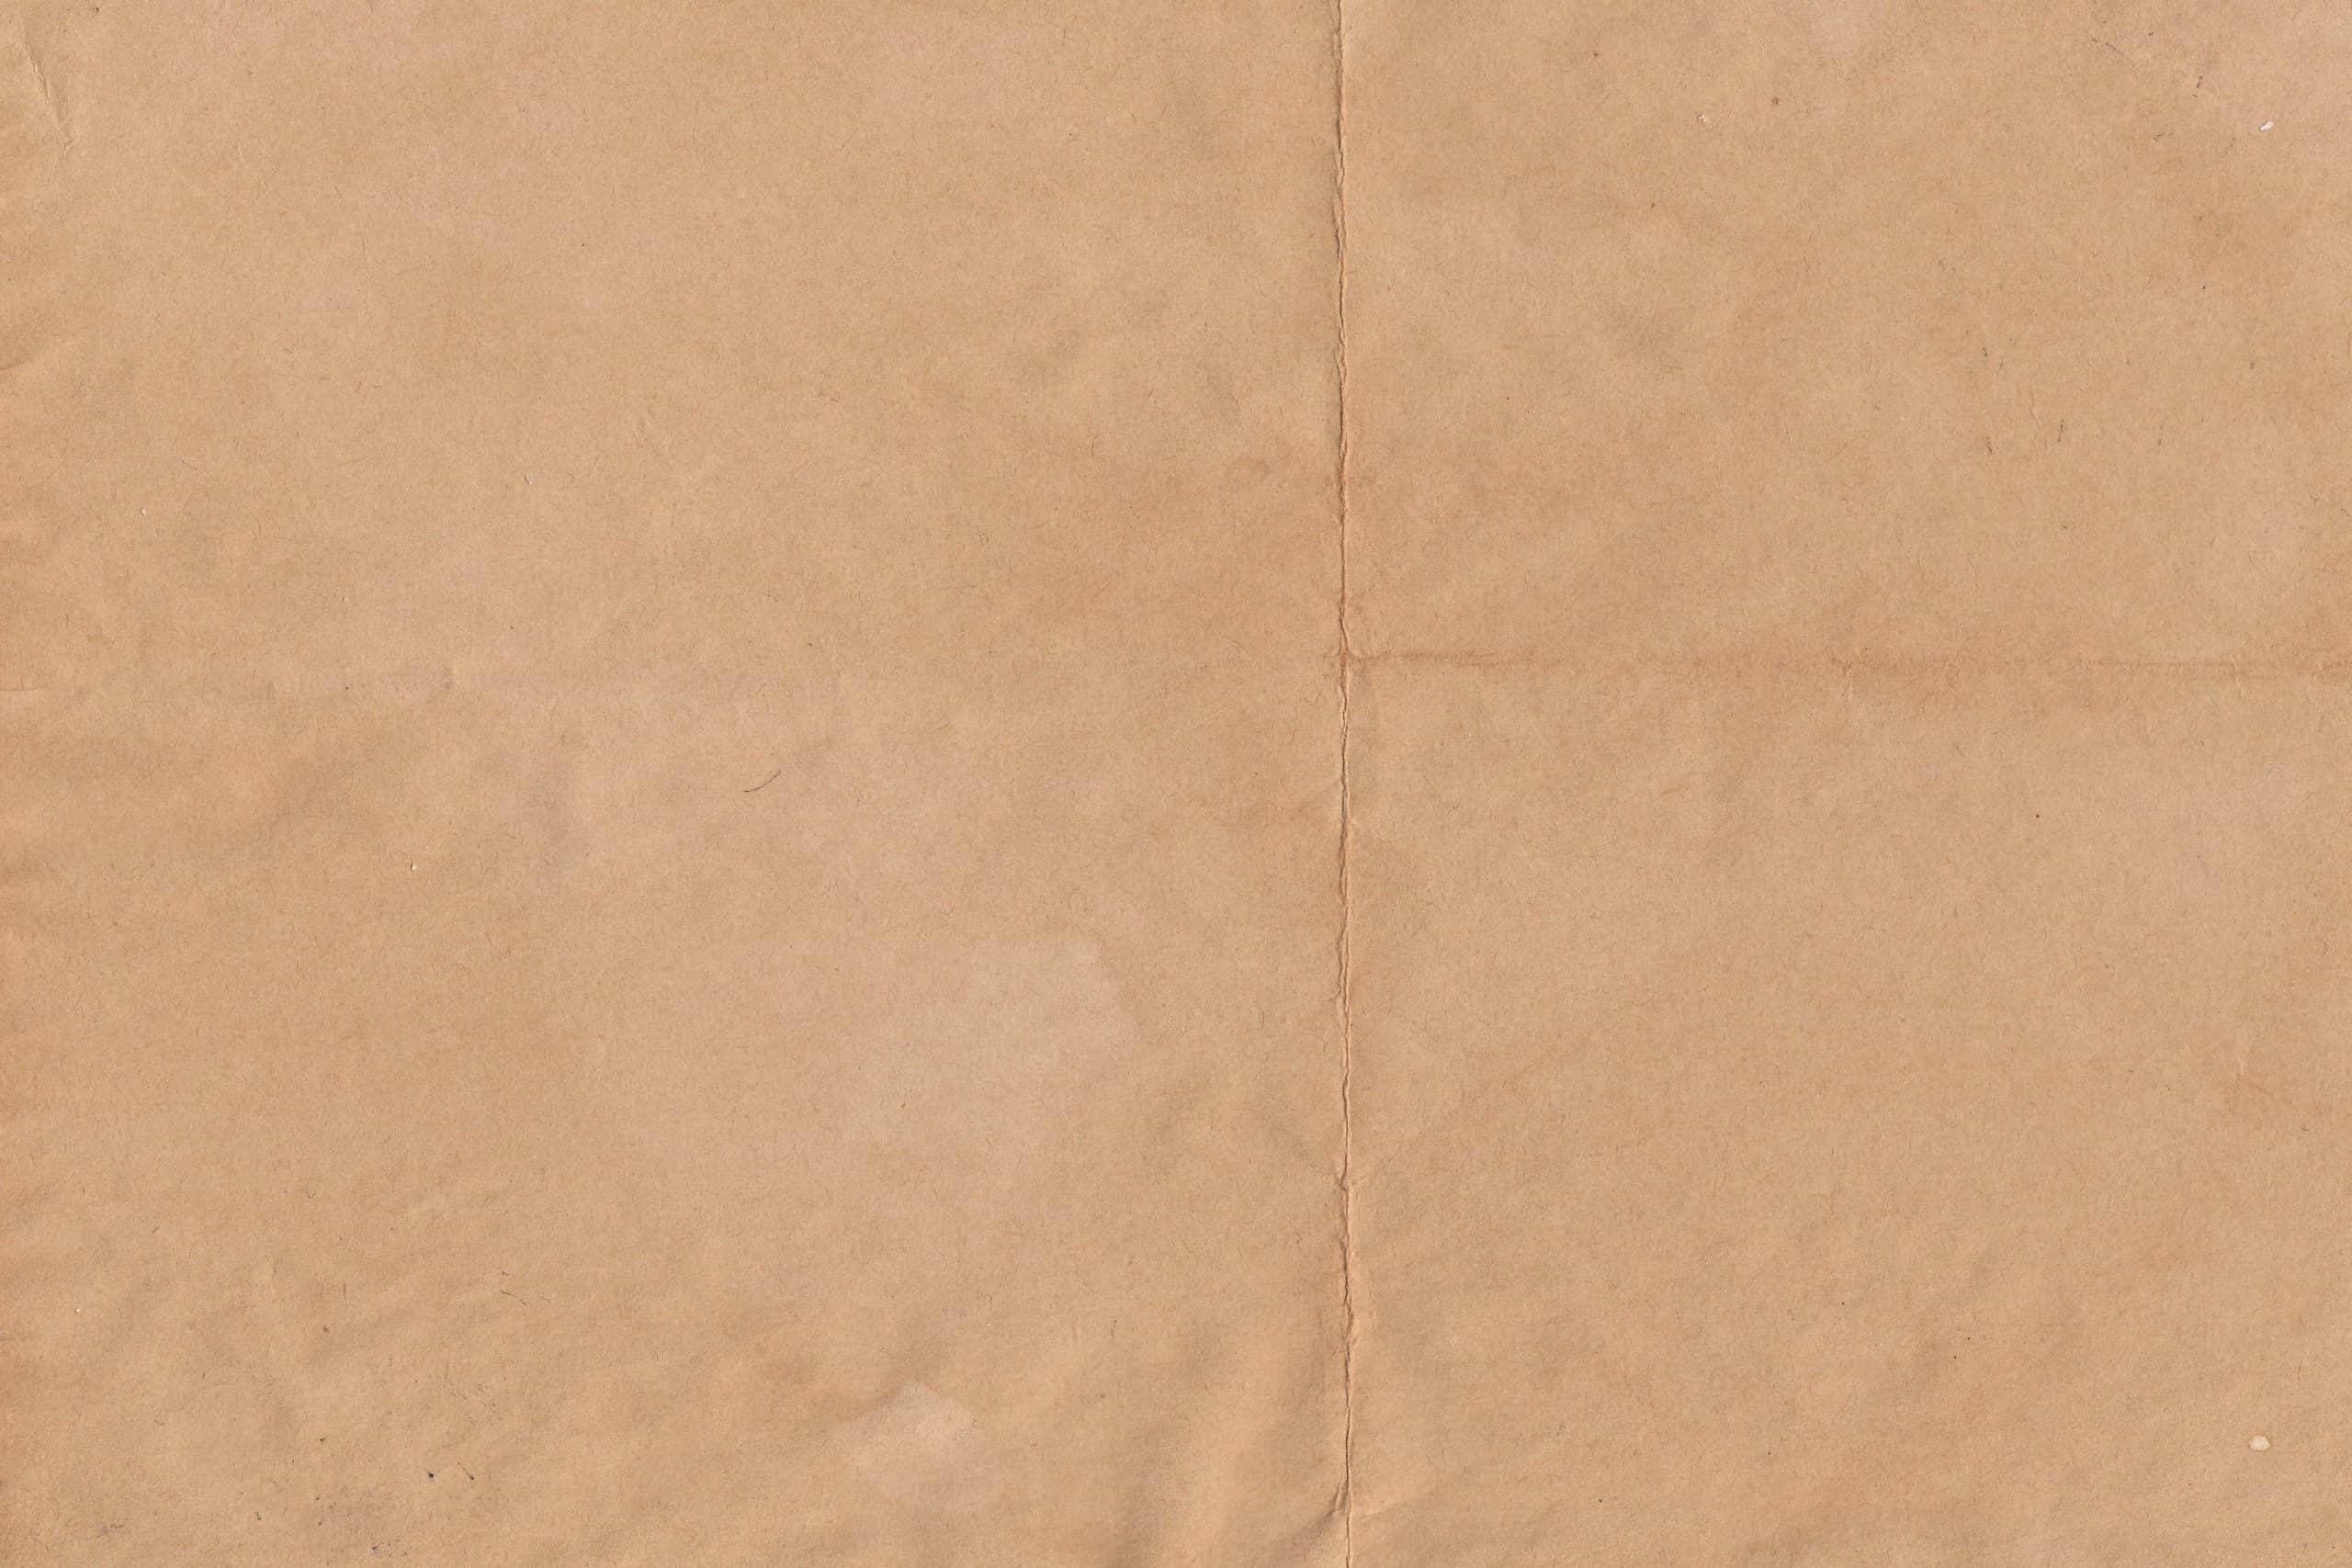 https://www.thinkingsustainably.com/wp-content/uploads/2021/04/Is-Parchment-Paper-Biodegradable-scaled.jpg